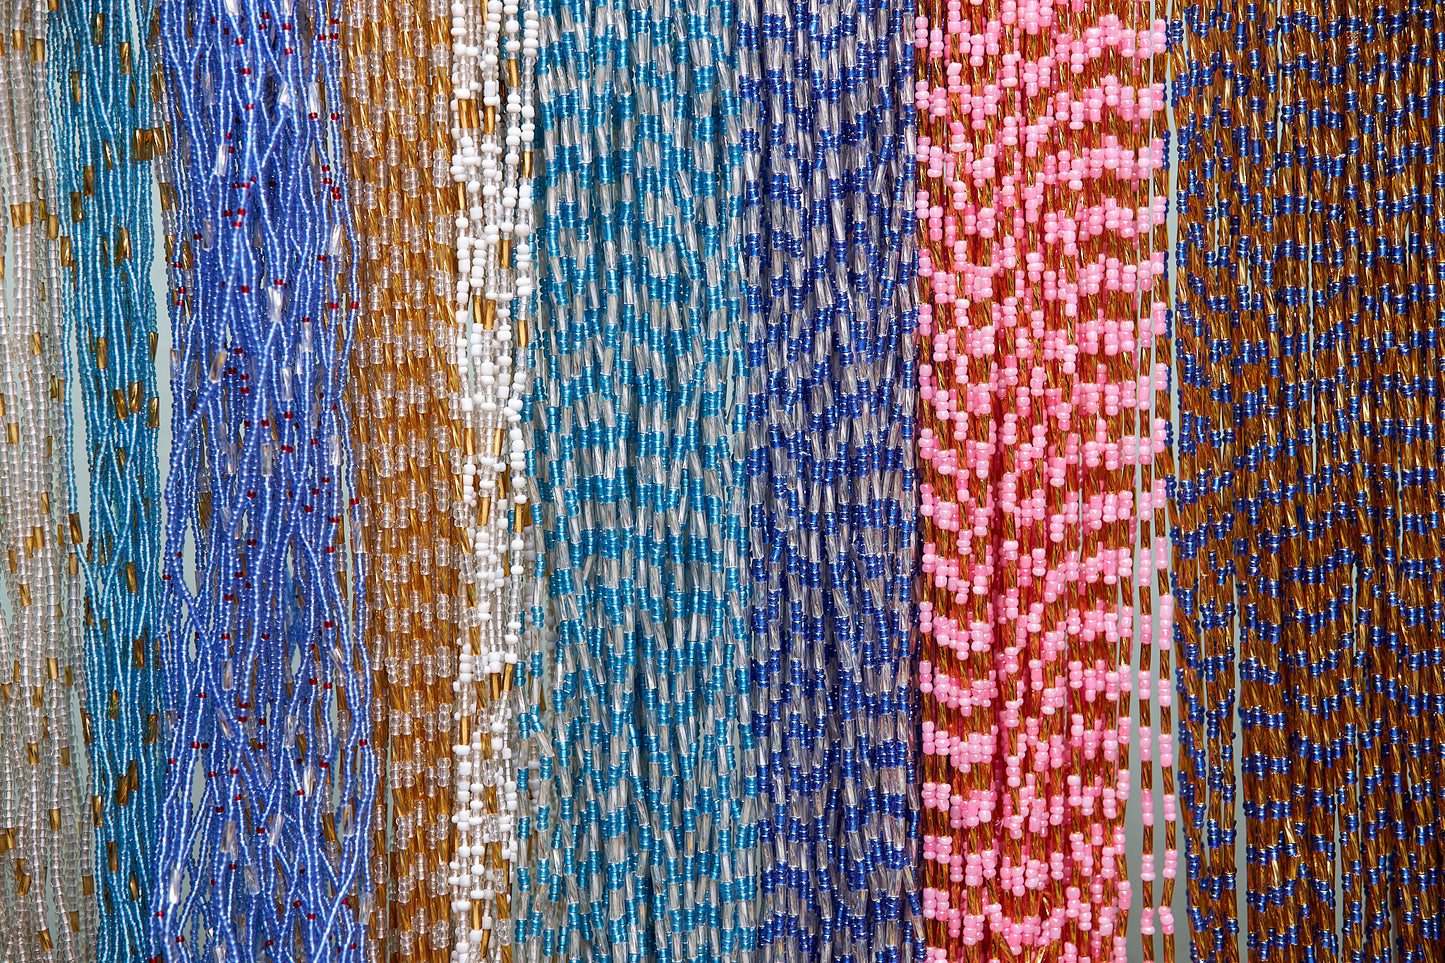 6 Different types of beads including 46 Inches Silver Glass Beads With Gold bars Tie on Waist Beads, 47 Inches Pink beads With gold bars Tie on Waist Beads, 42 Inches Blue beads with Gold bars tie on waist beads, 45 Inches Sea blue Glass beads With Silver Bars Tie On waist Beads, 46 Inches Blue beads with Silver bars tie on waist beads, 46 Inches Silver Blue And Red beads with Gold Bars tie on waist beads